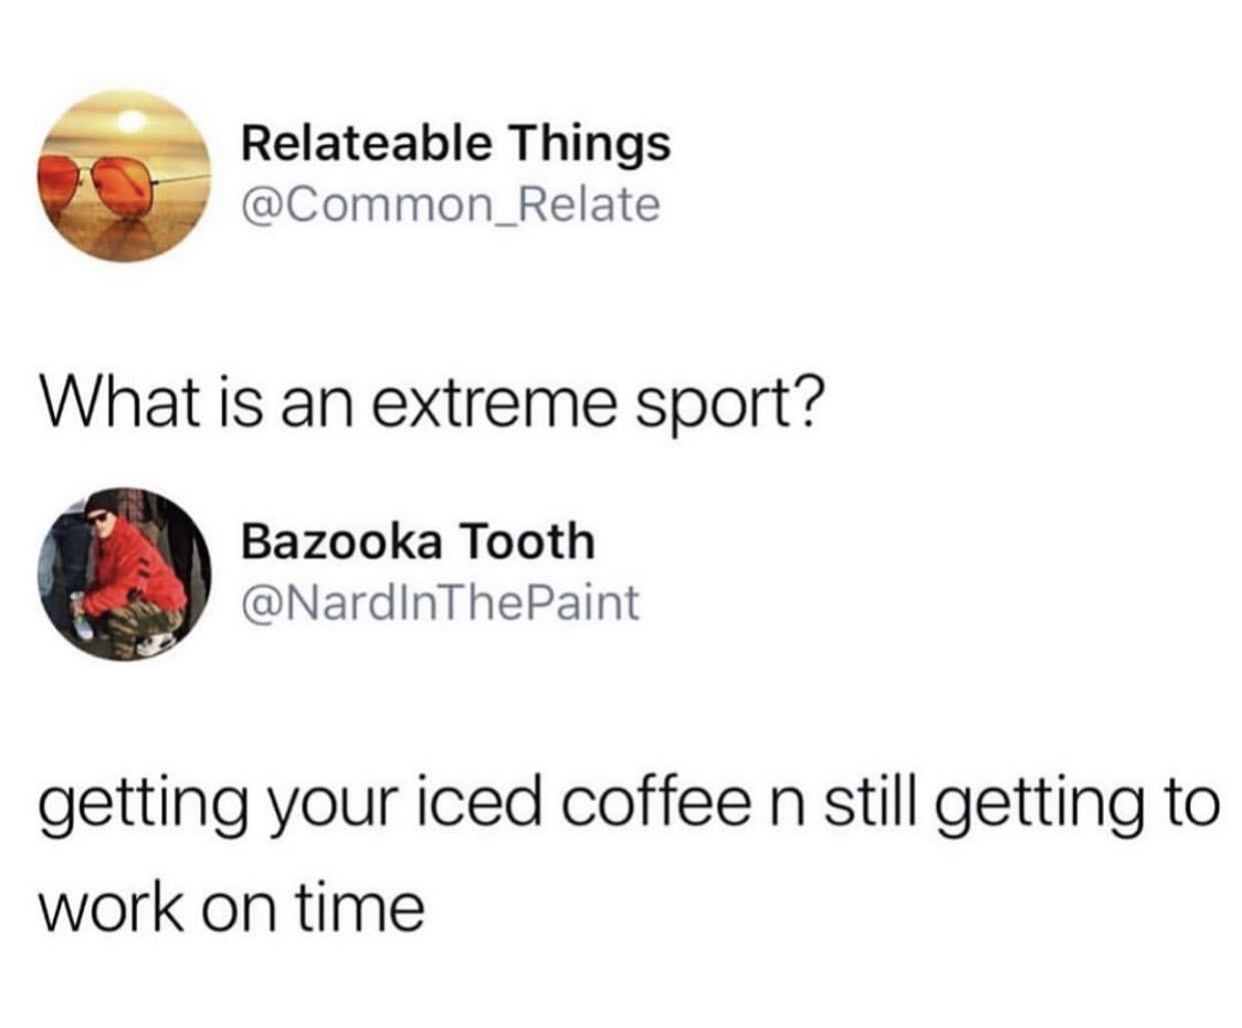 Relateable Things What is an extreme sport? Bazooka Tooth getting your iced coffee n still getting to work on time